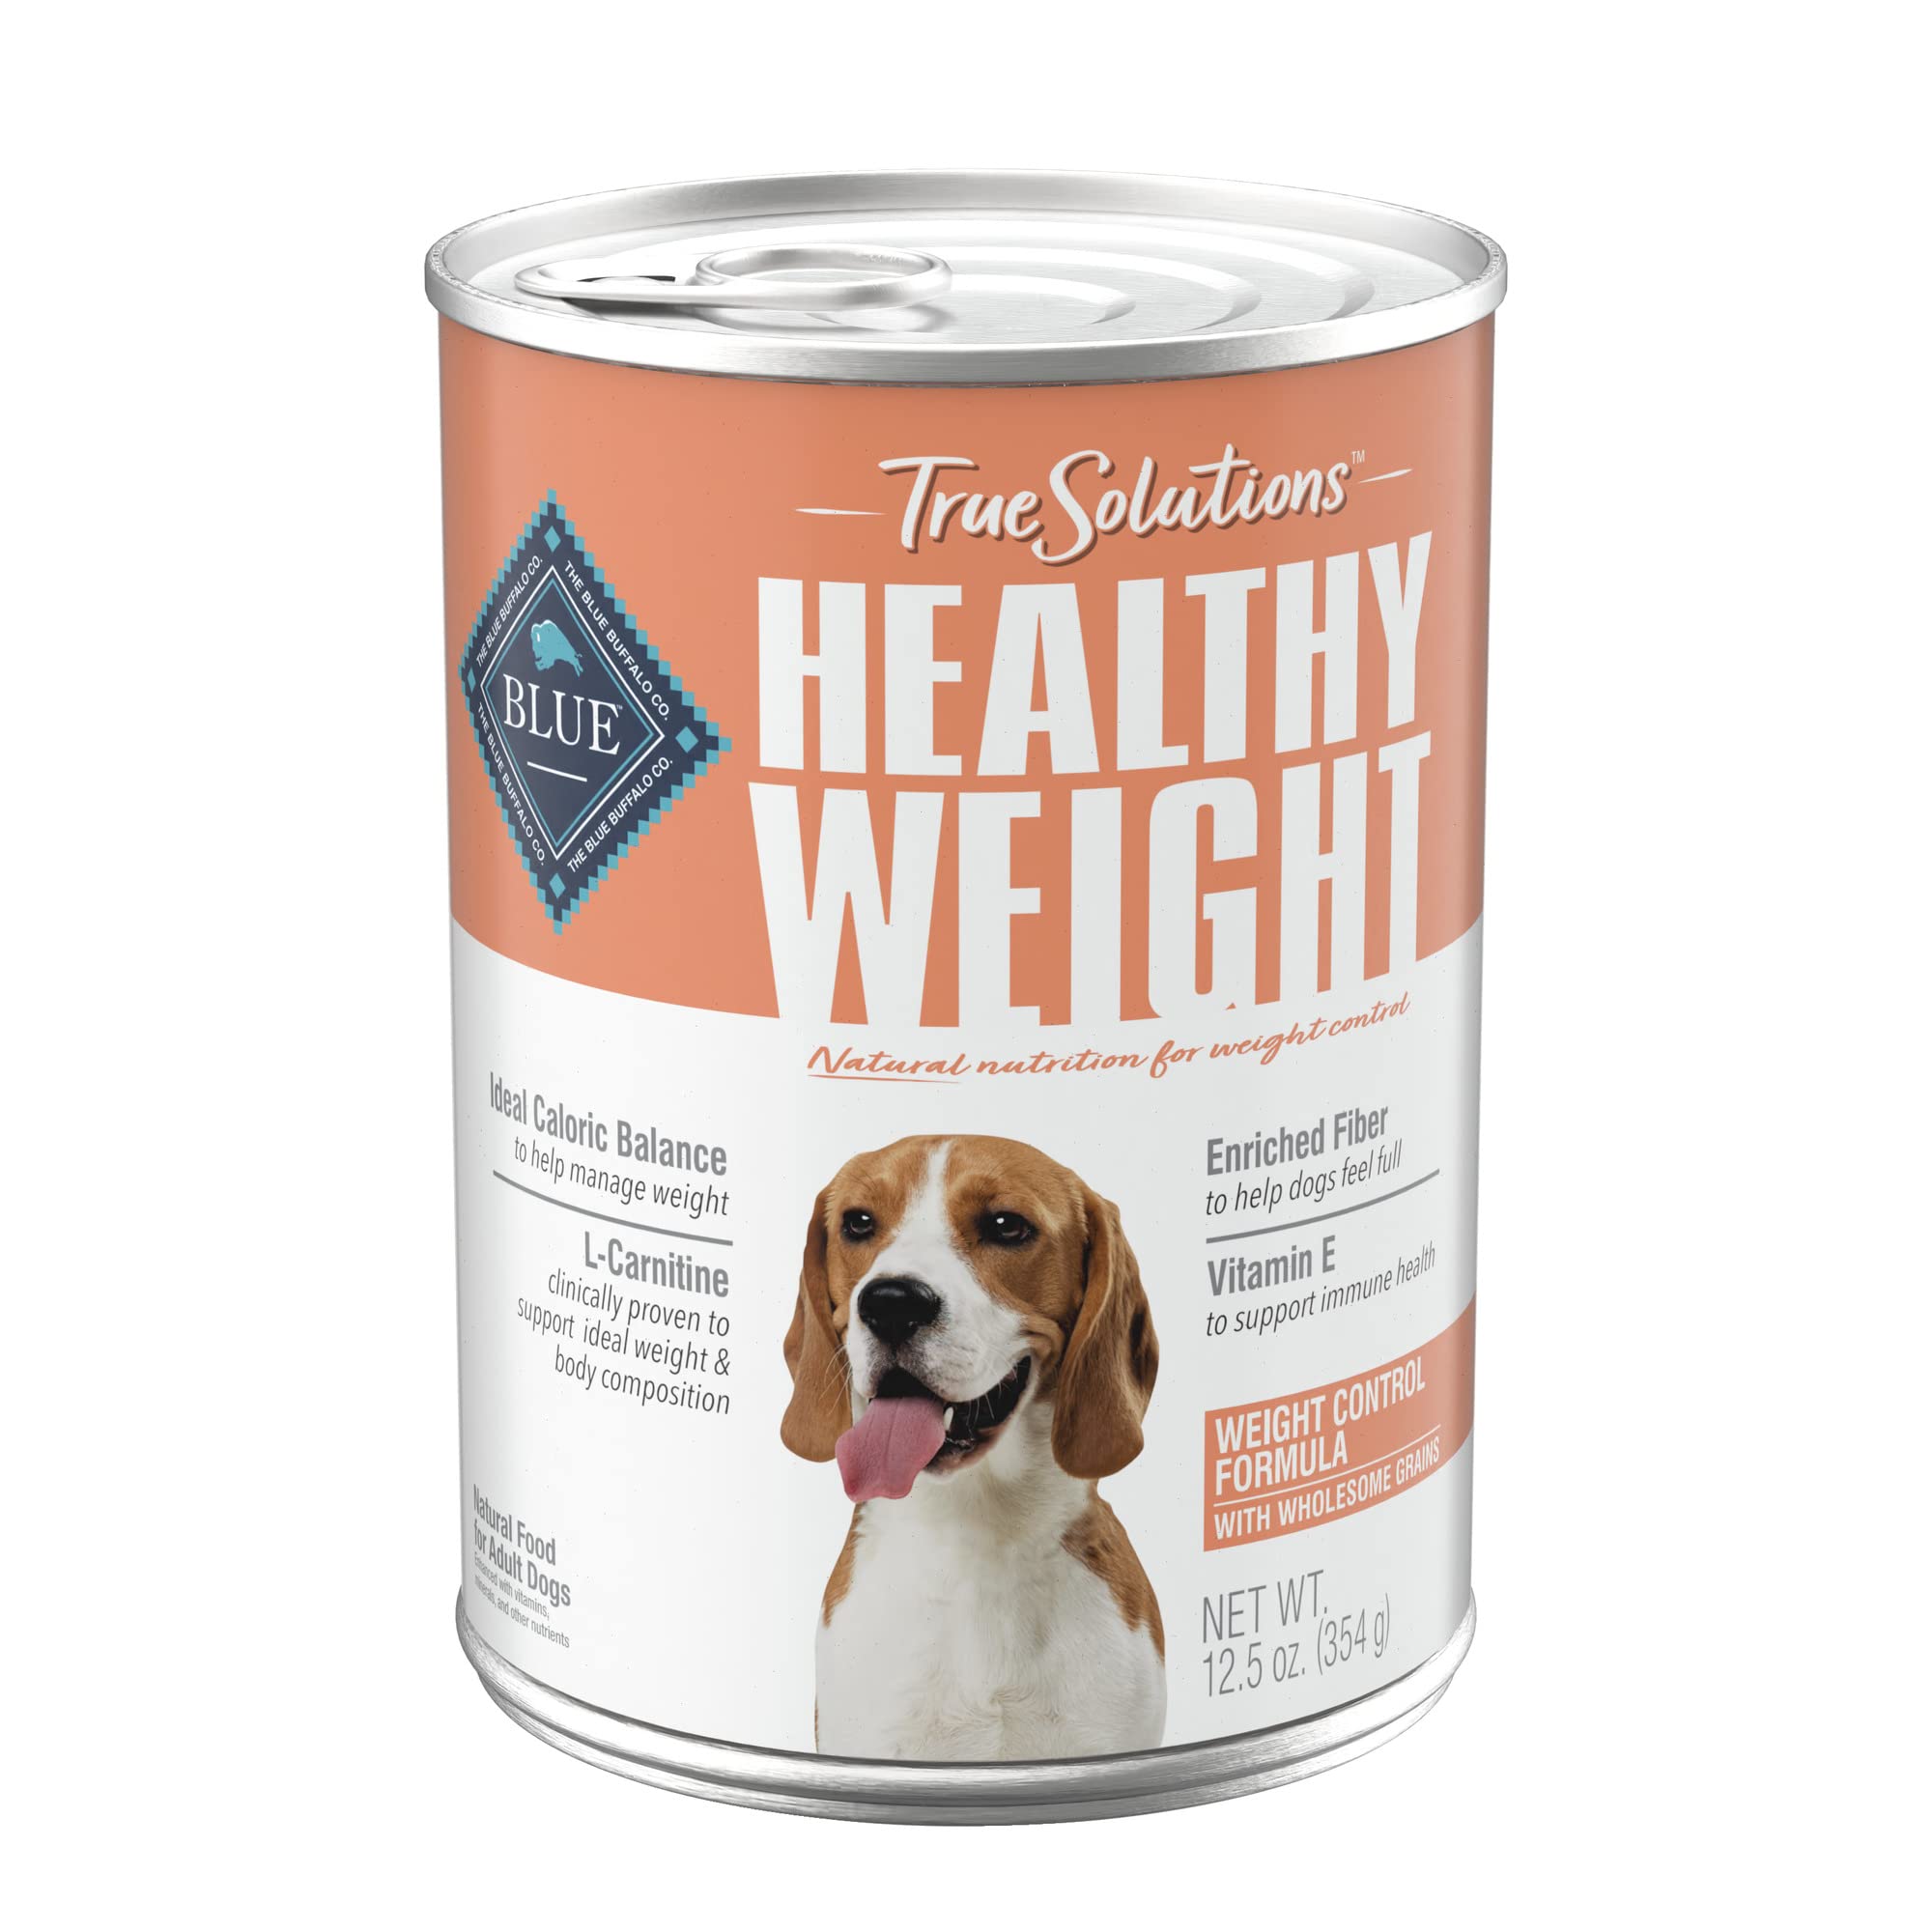 Blue Buffalo True Solutions Healthy Weight Natural Weight Control Adult Dog Food, Chicken